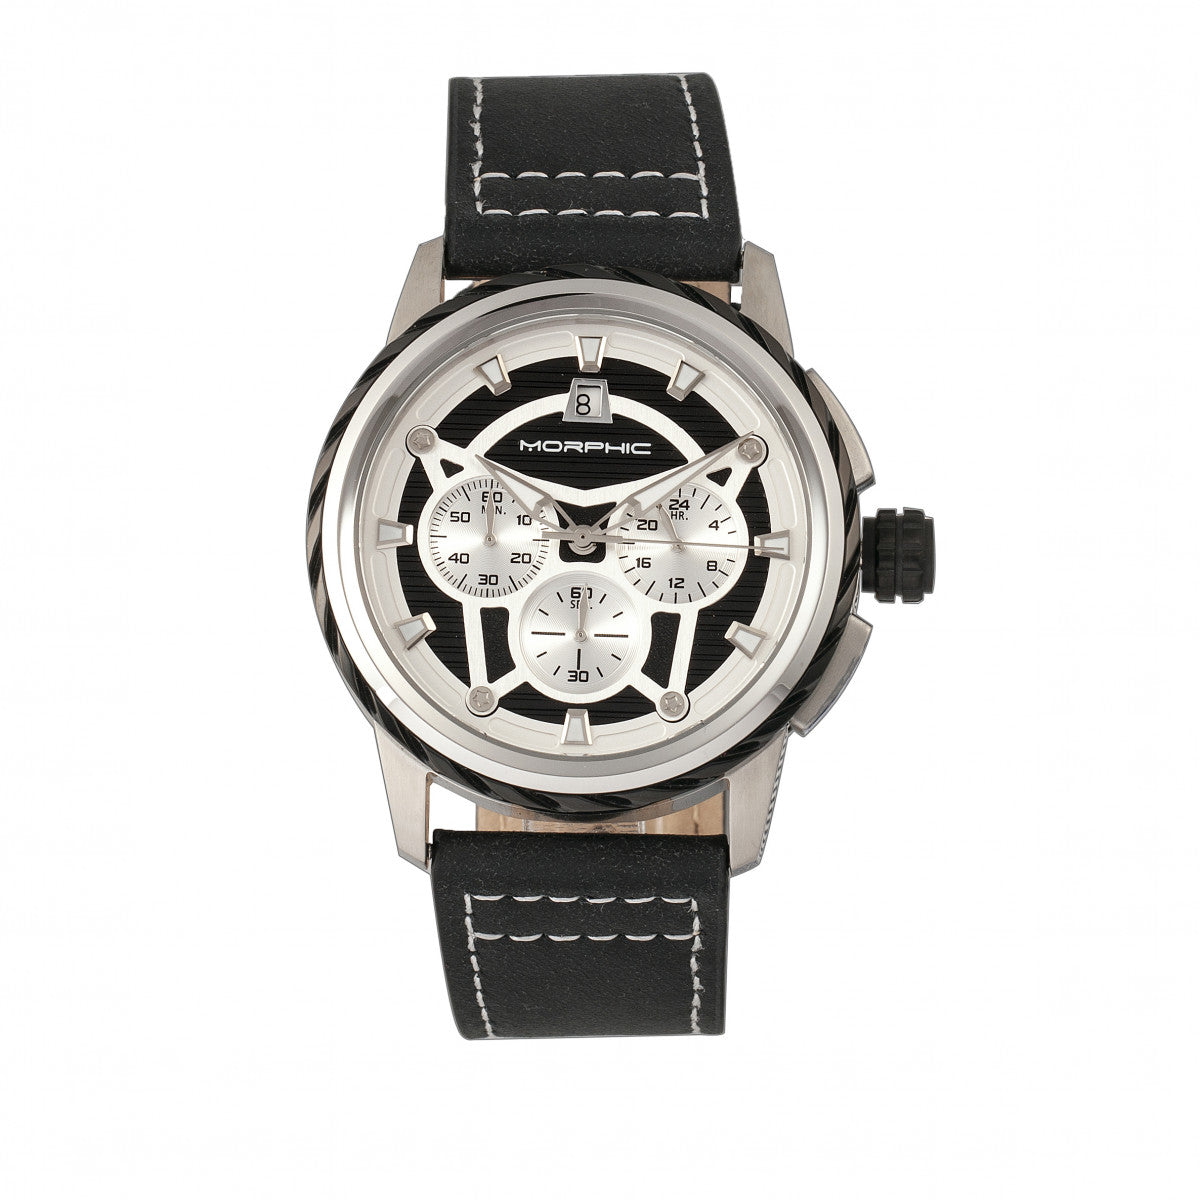 Morphic M61 Series Men's Watch Black Band Silver Case MPH6101 – Morphic  Watches